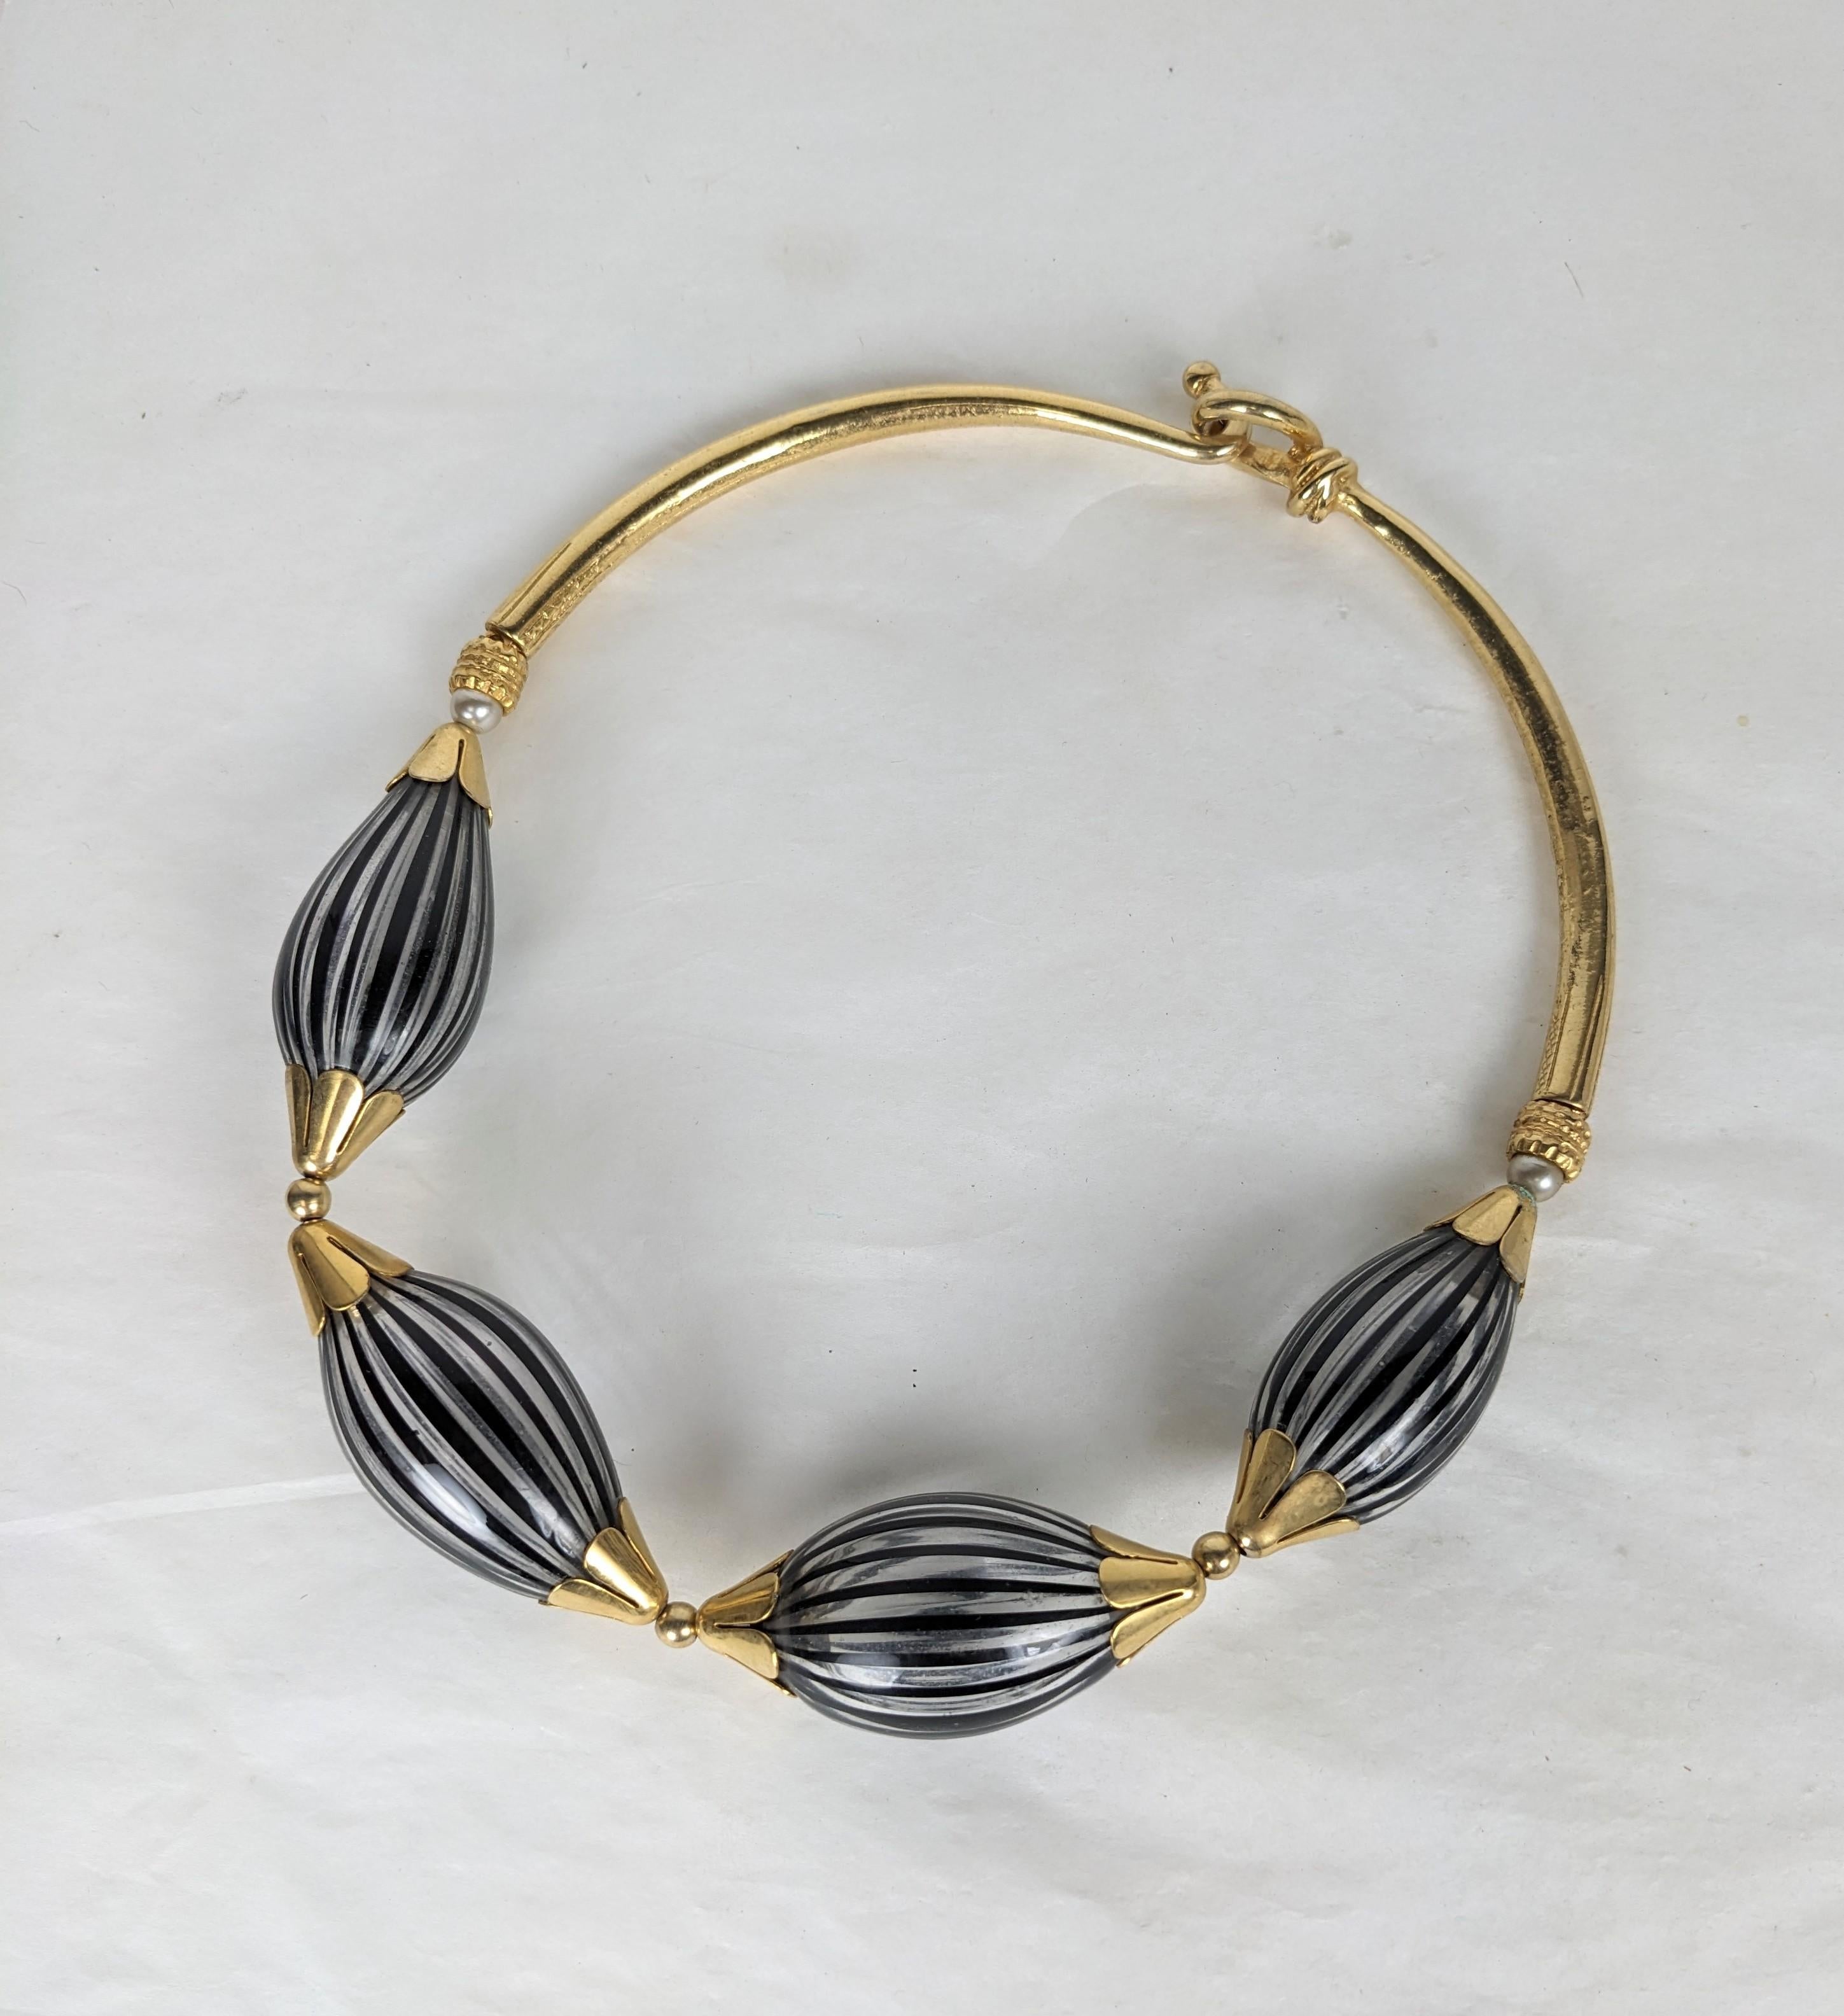 Unusual Artisan French Neckalce with Venetian Glass Beads from the 1980's. Large blown glass beads with black and white striations end in gilt floral caps and a hard necklet closure on back mixed with gold beads and faux pearls. 1980's France. 18